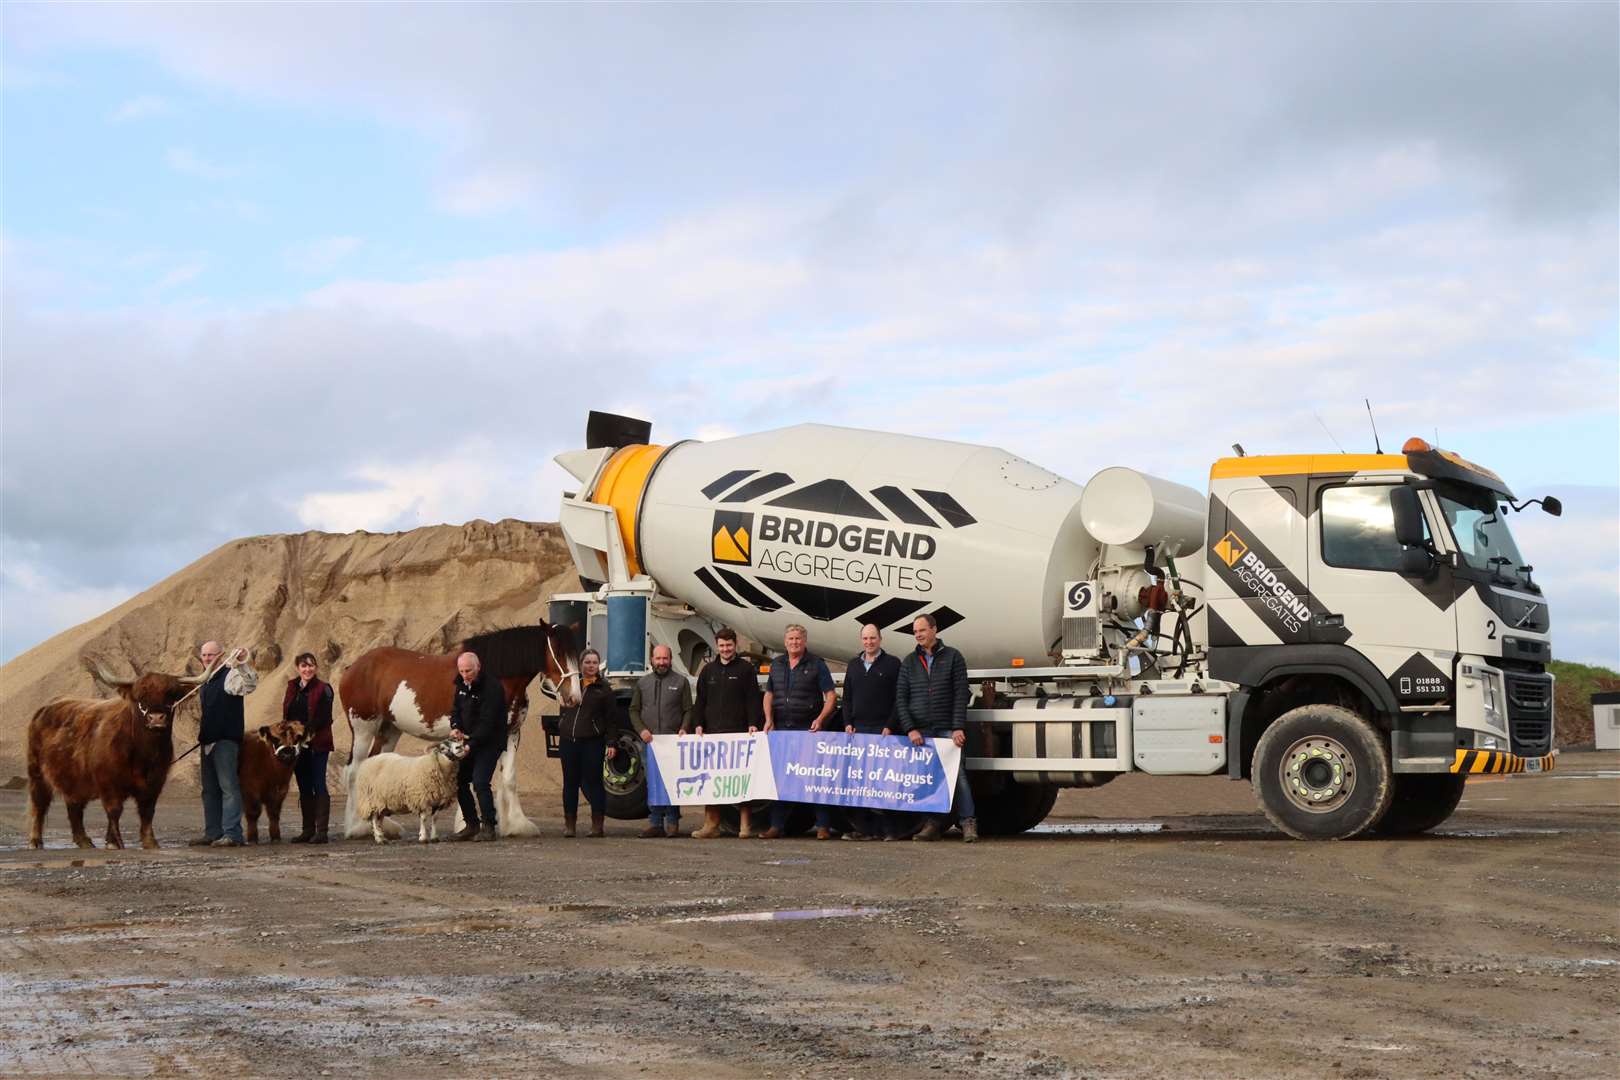 Bridgend Aggregates are the main sponsors of this year's Turriff Show.